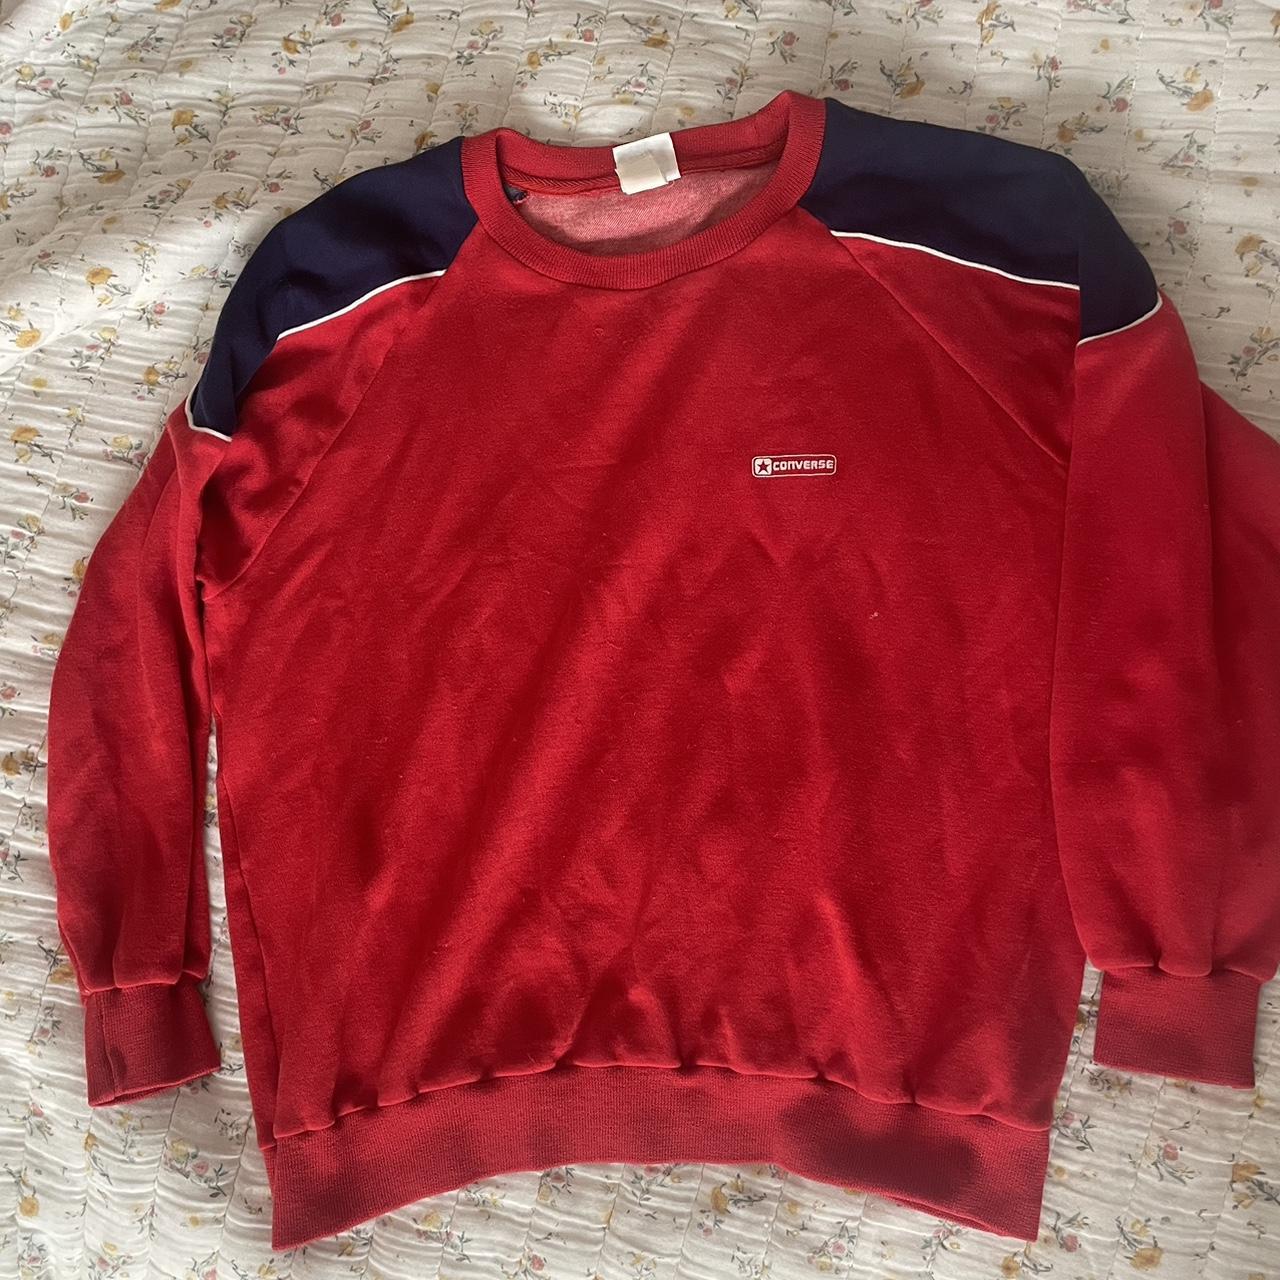 Converse Men's Red and Navy Jumper